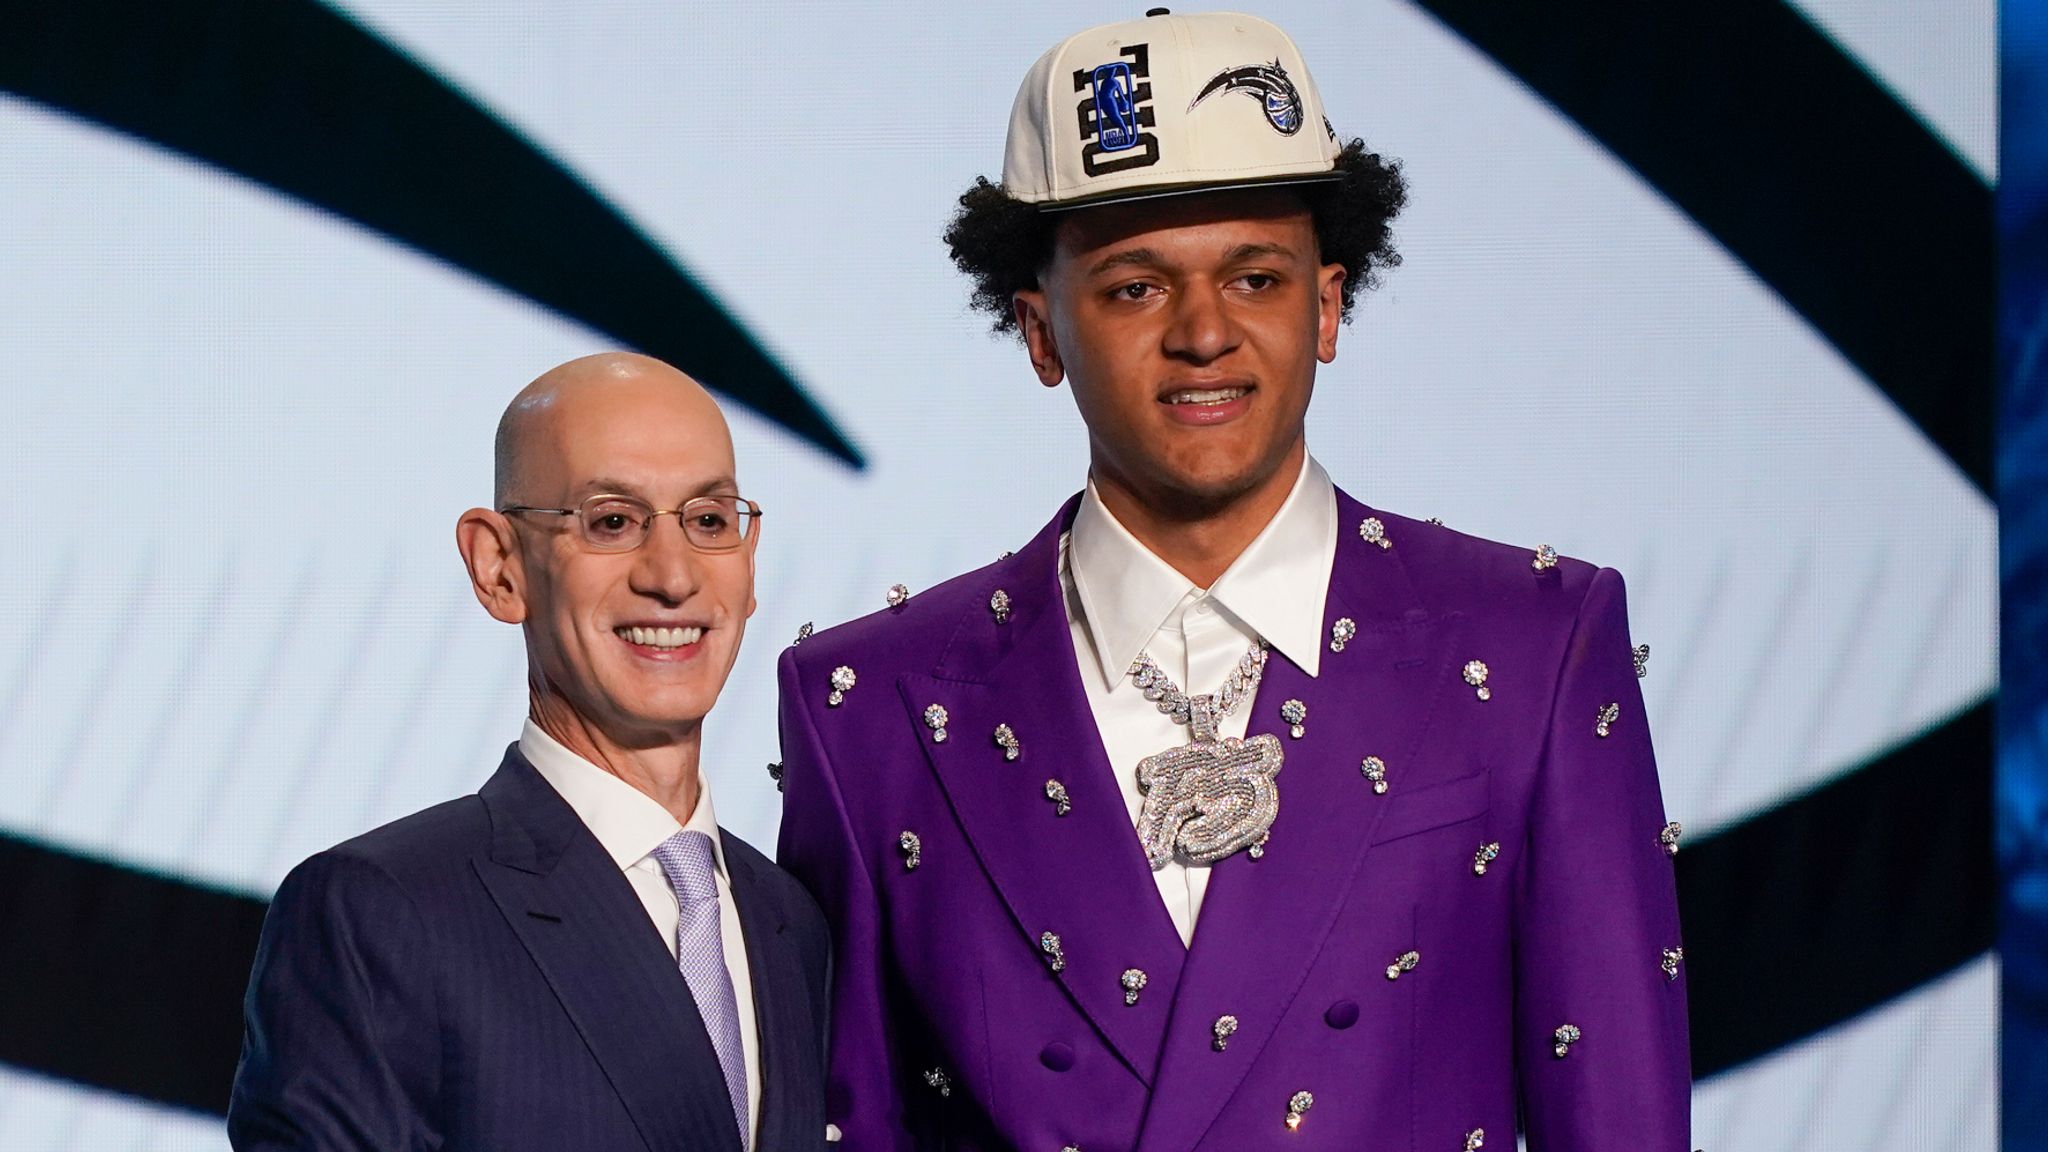 NBA draft 2021 free live stream, time, TV channel, pick order